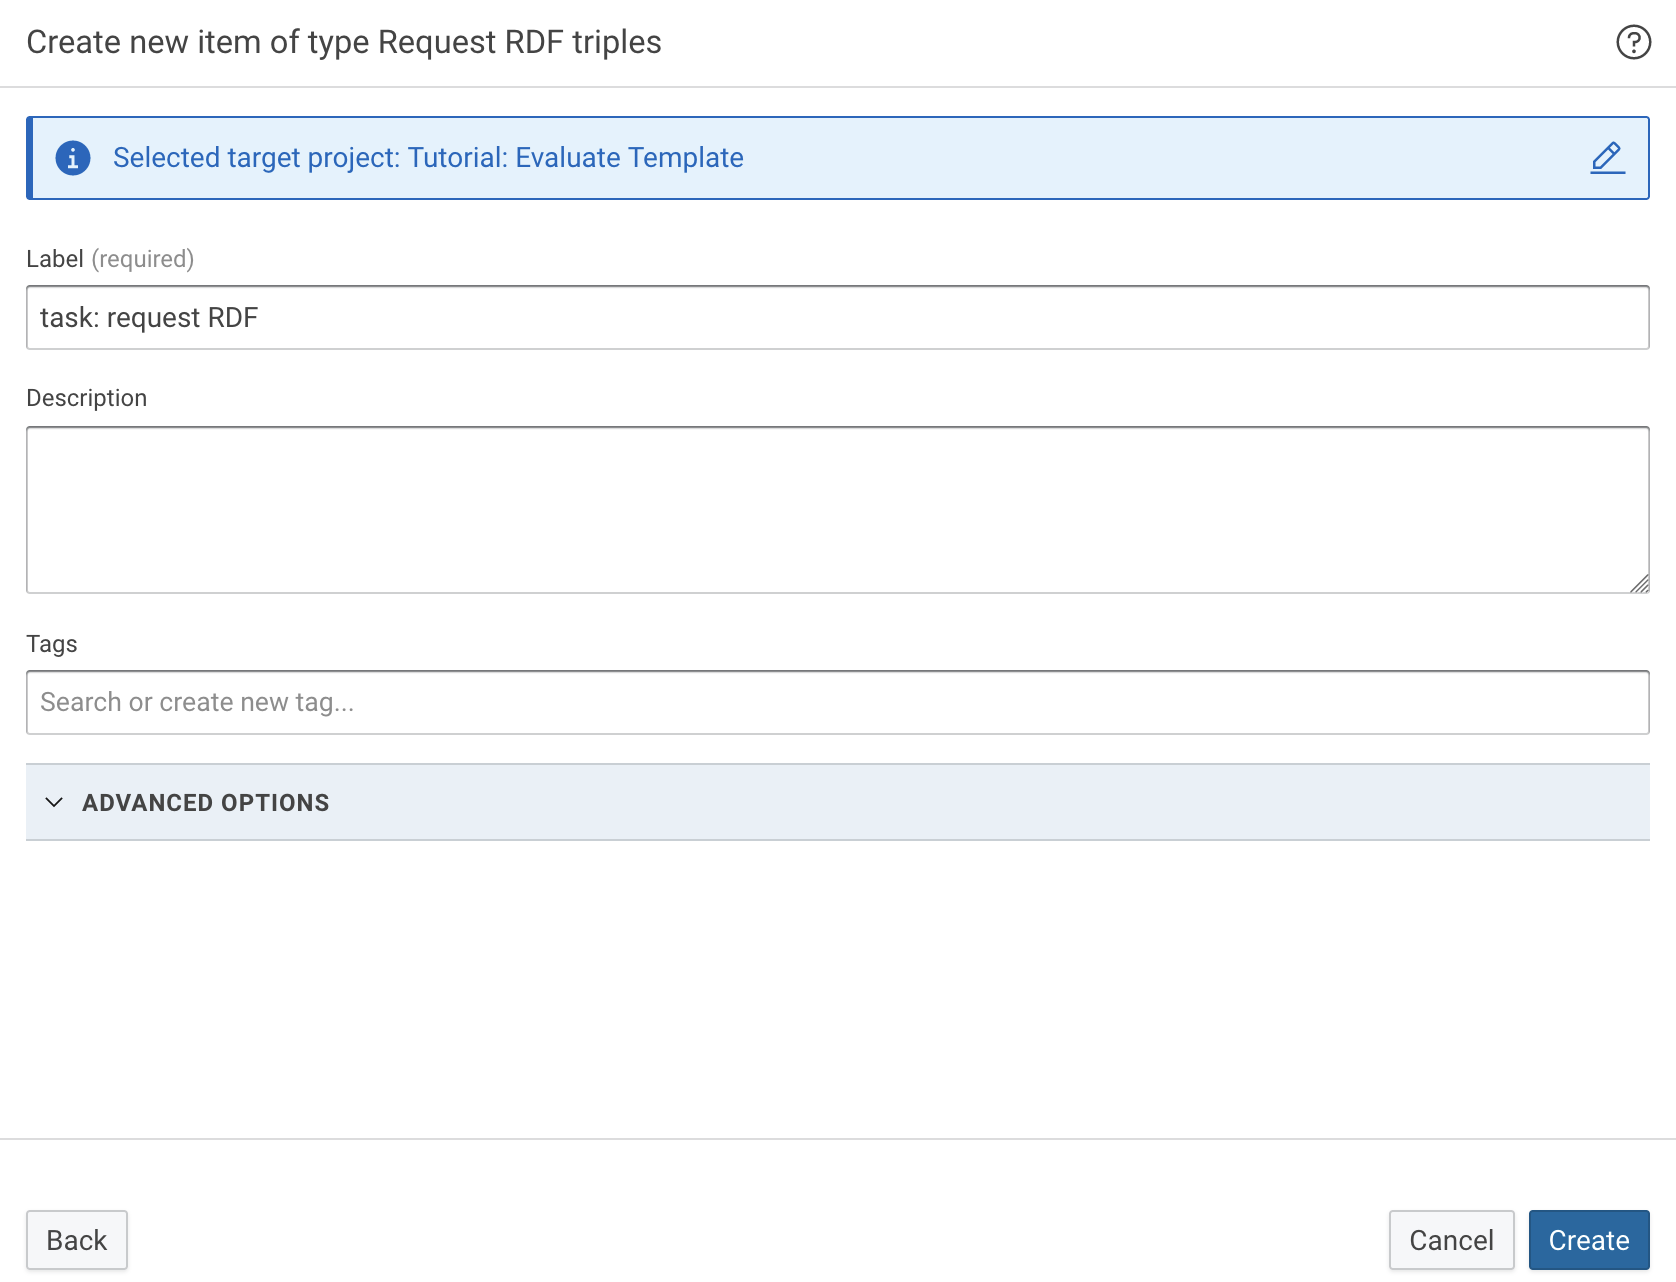 Dialog to create new Request RDF triples task